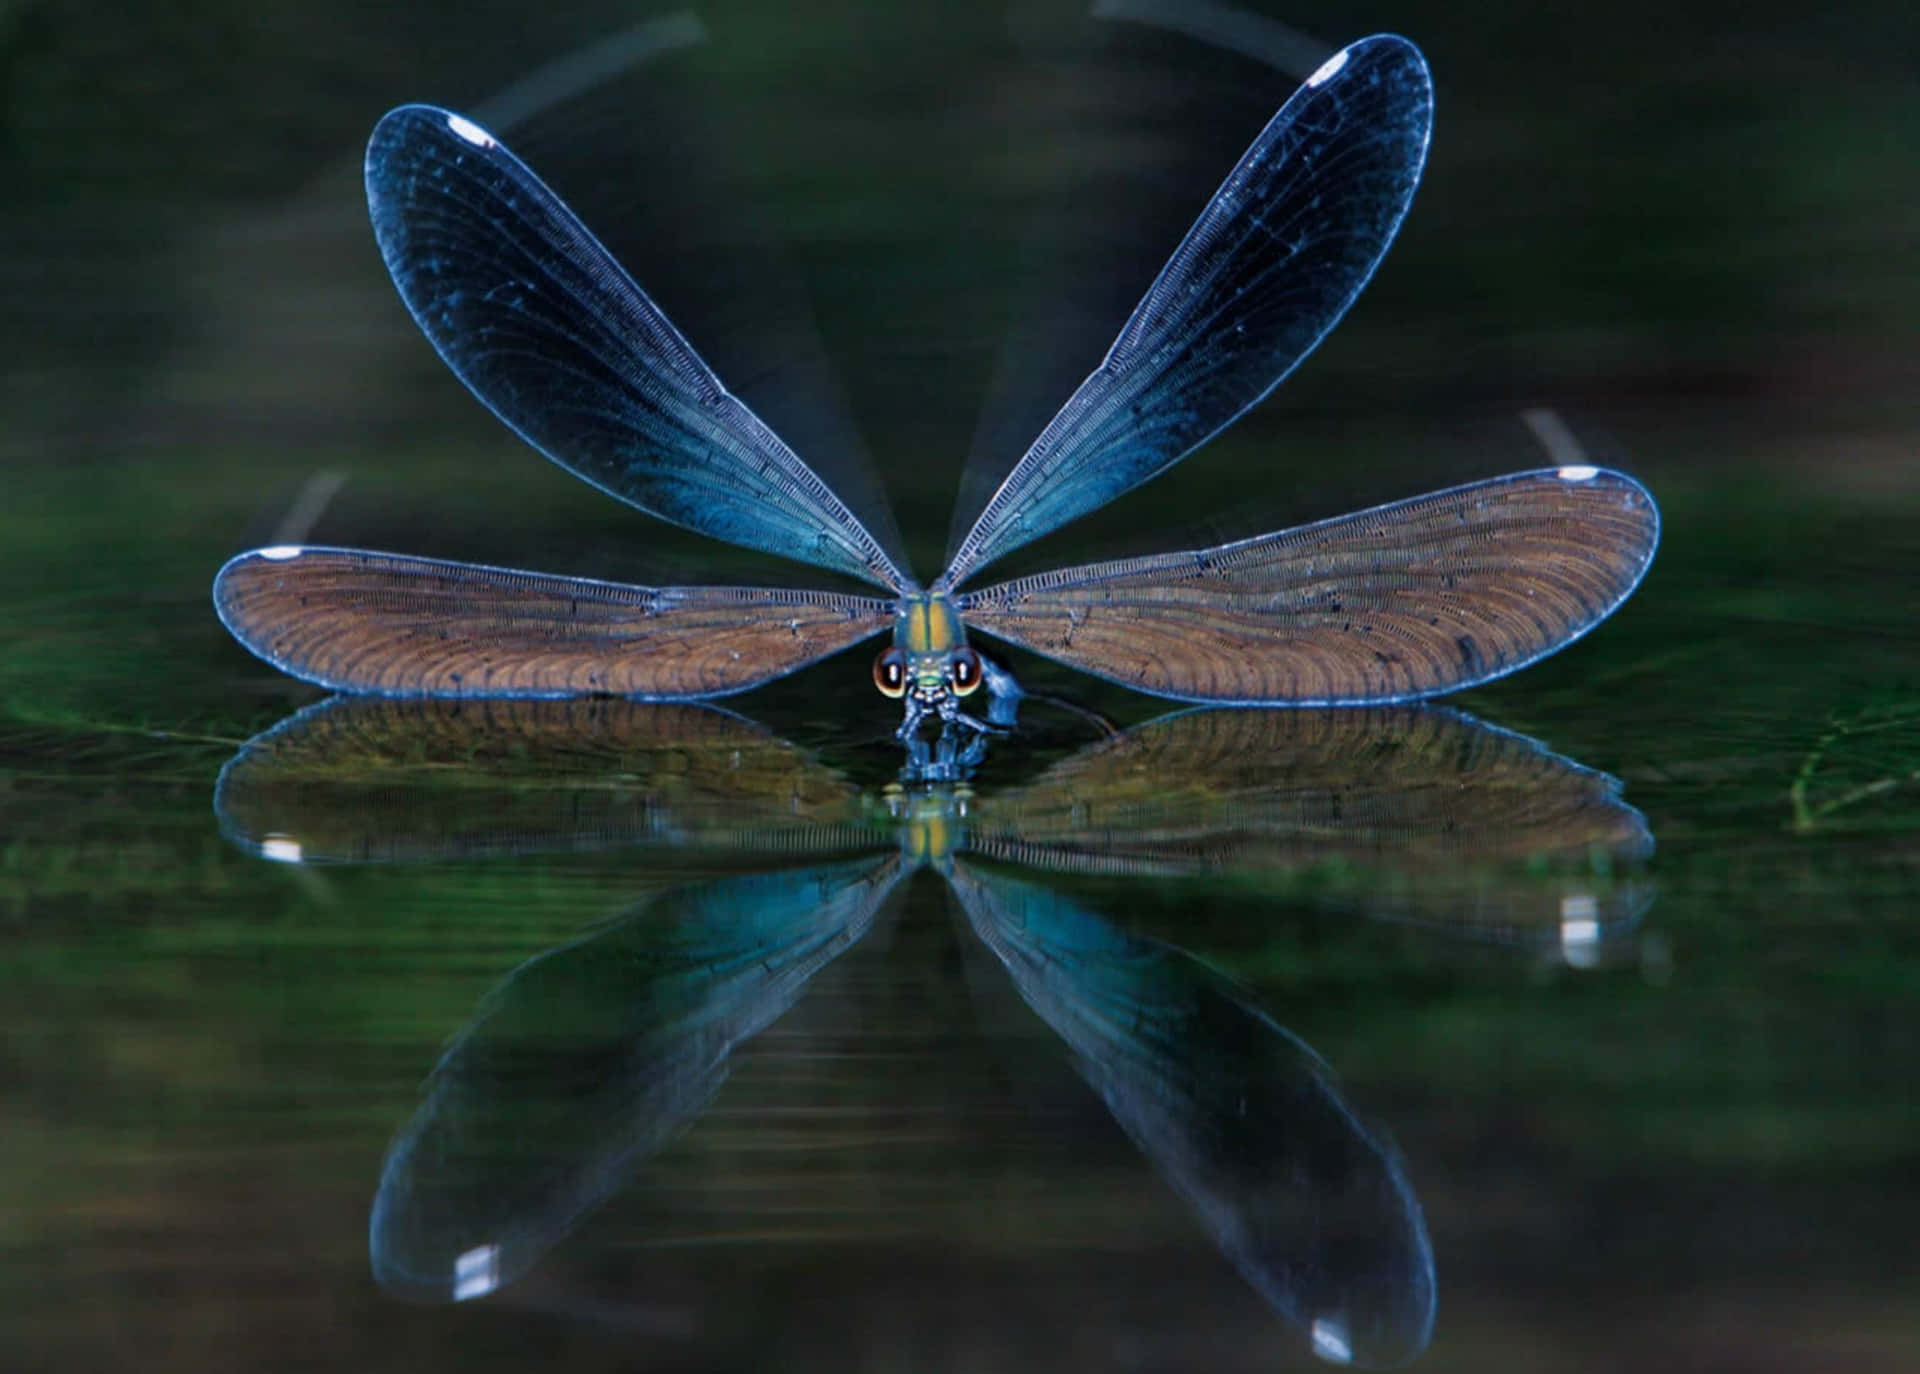 Dragonfly Soaring Through the Air